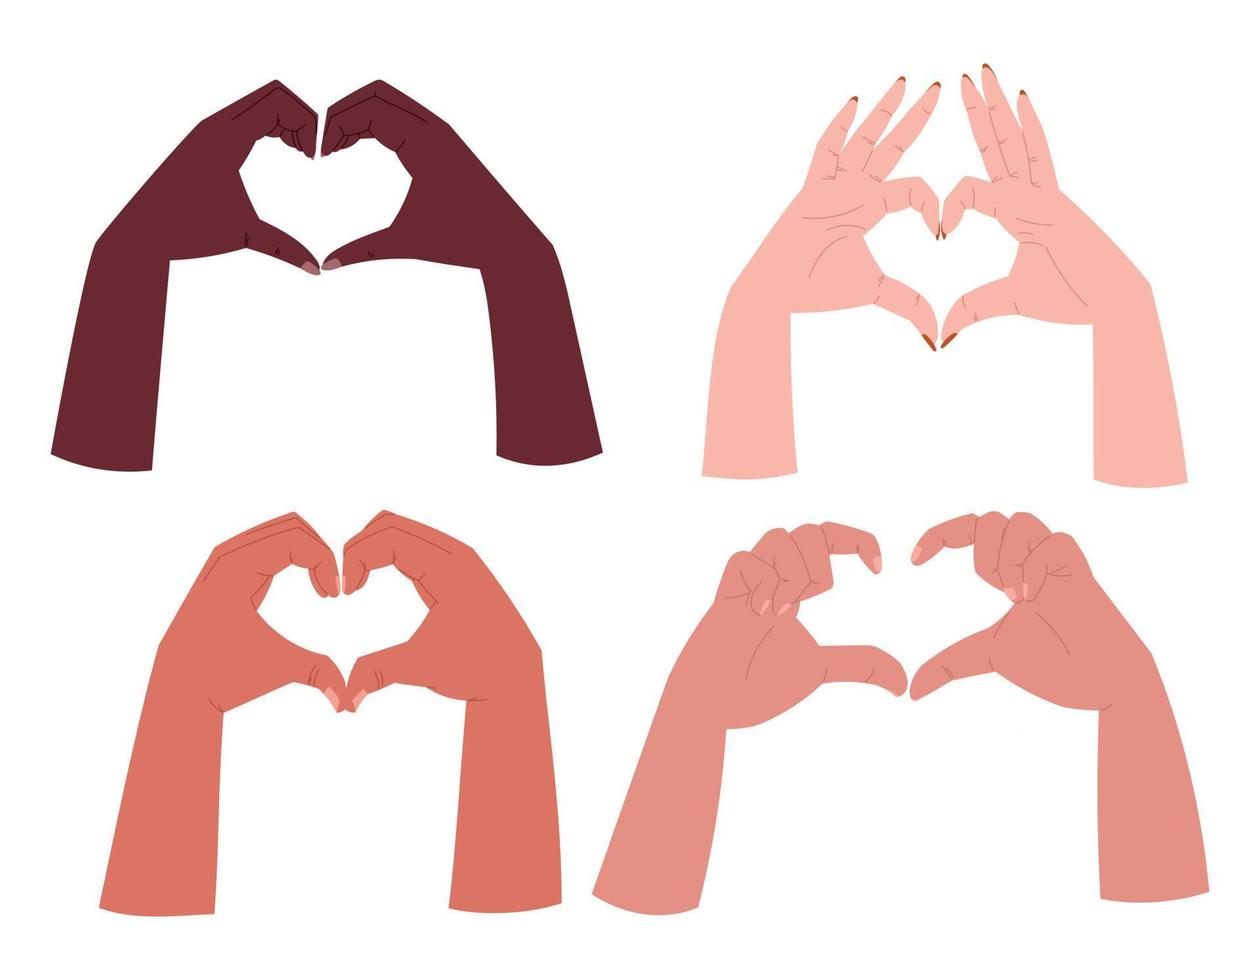 People hands making heart shape with fingers. Set of vector isolated cartoon illustrations.